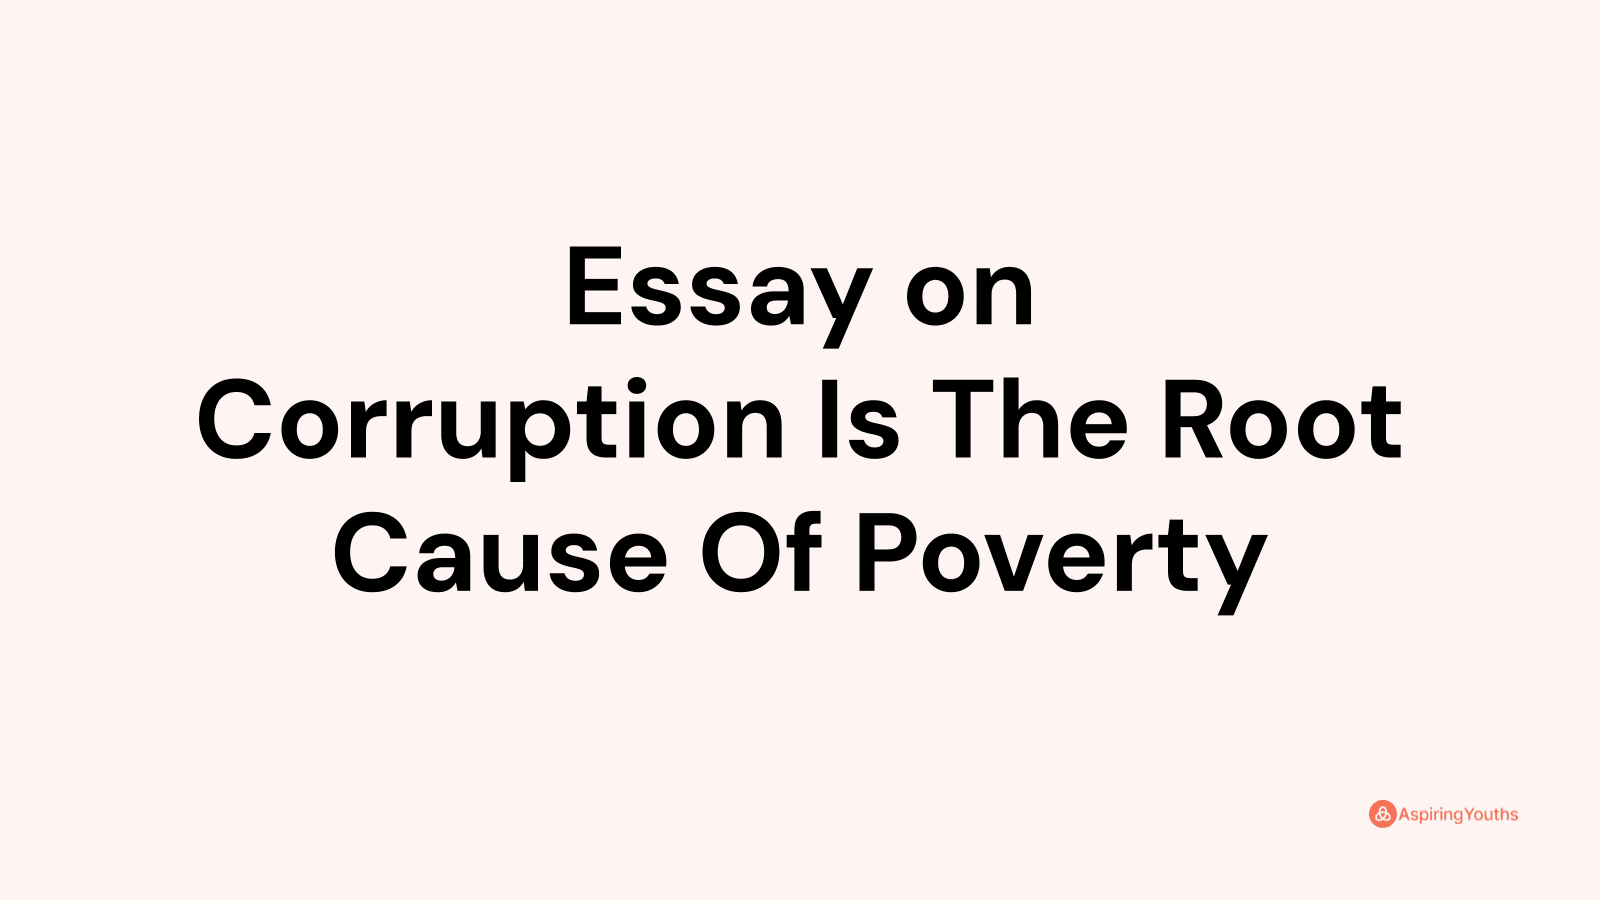 exemplification essay about corruption is the root cause of poverty